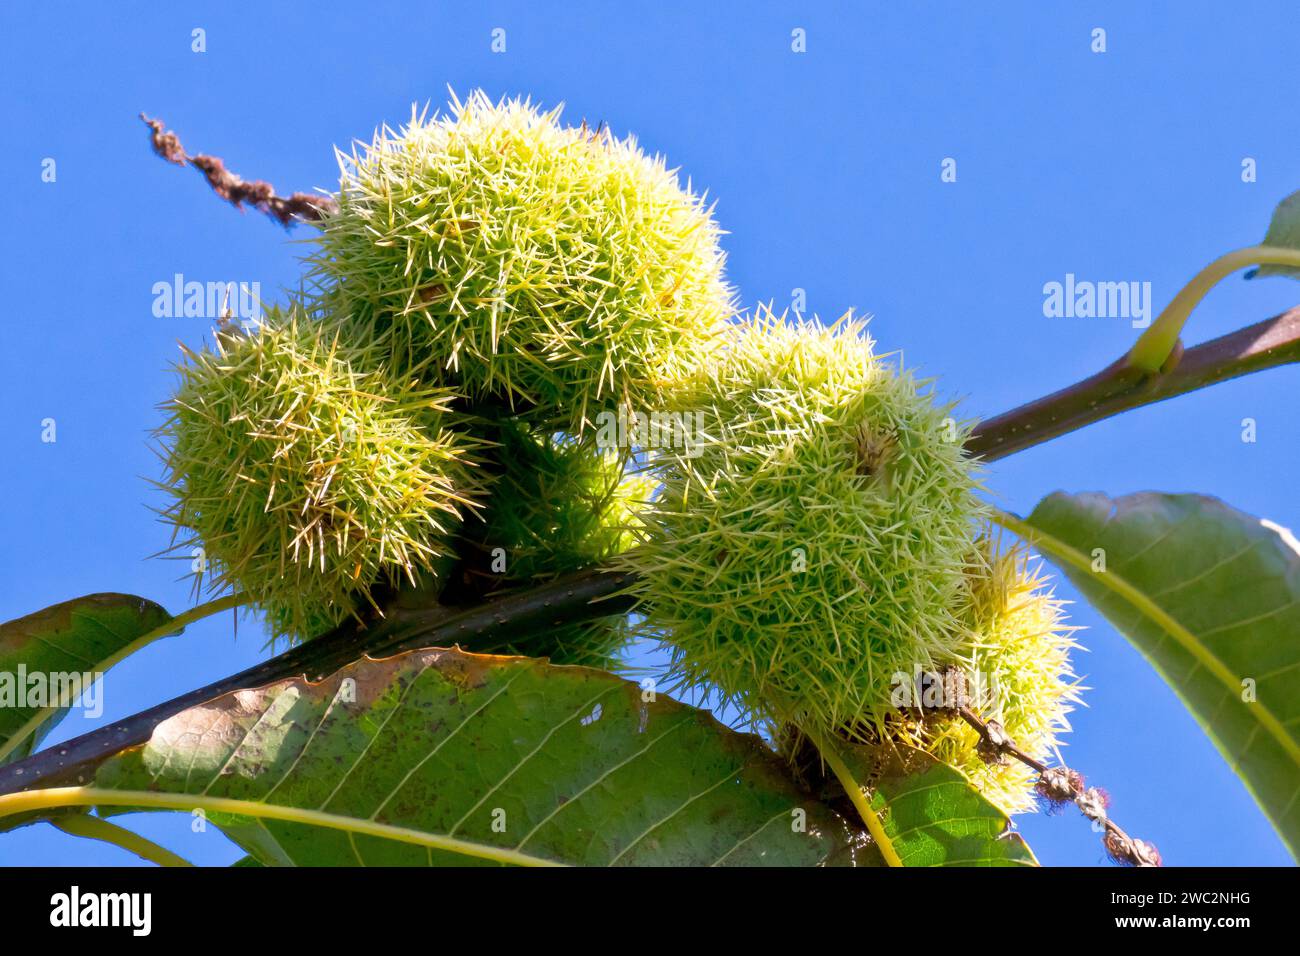 Sweet Chestnut or Spanish Chestnut (castanea sativa), close up of the spiky fruits on the branch of a tree against a blue sky in the autumn sunshine. Stock Photo